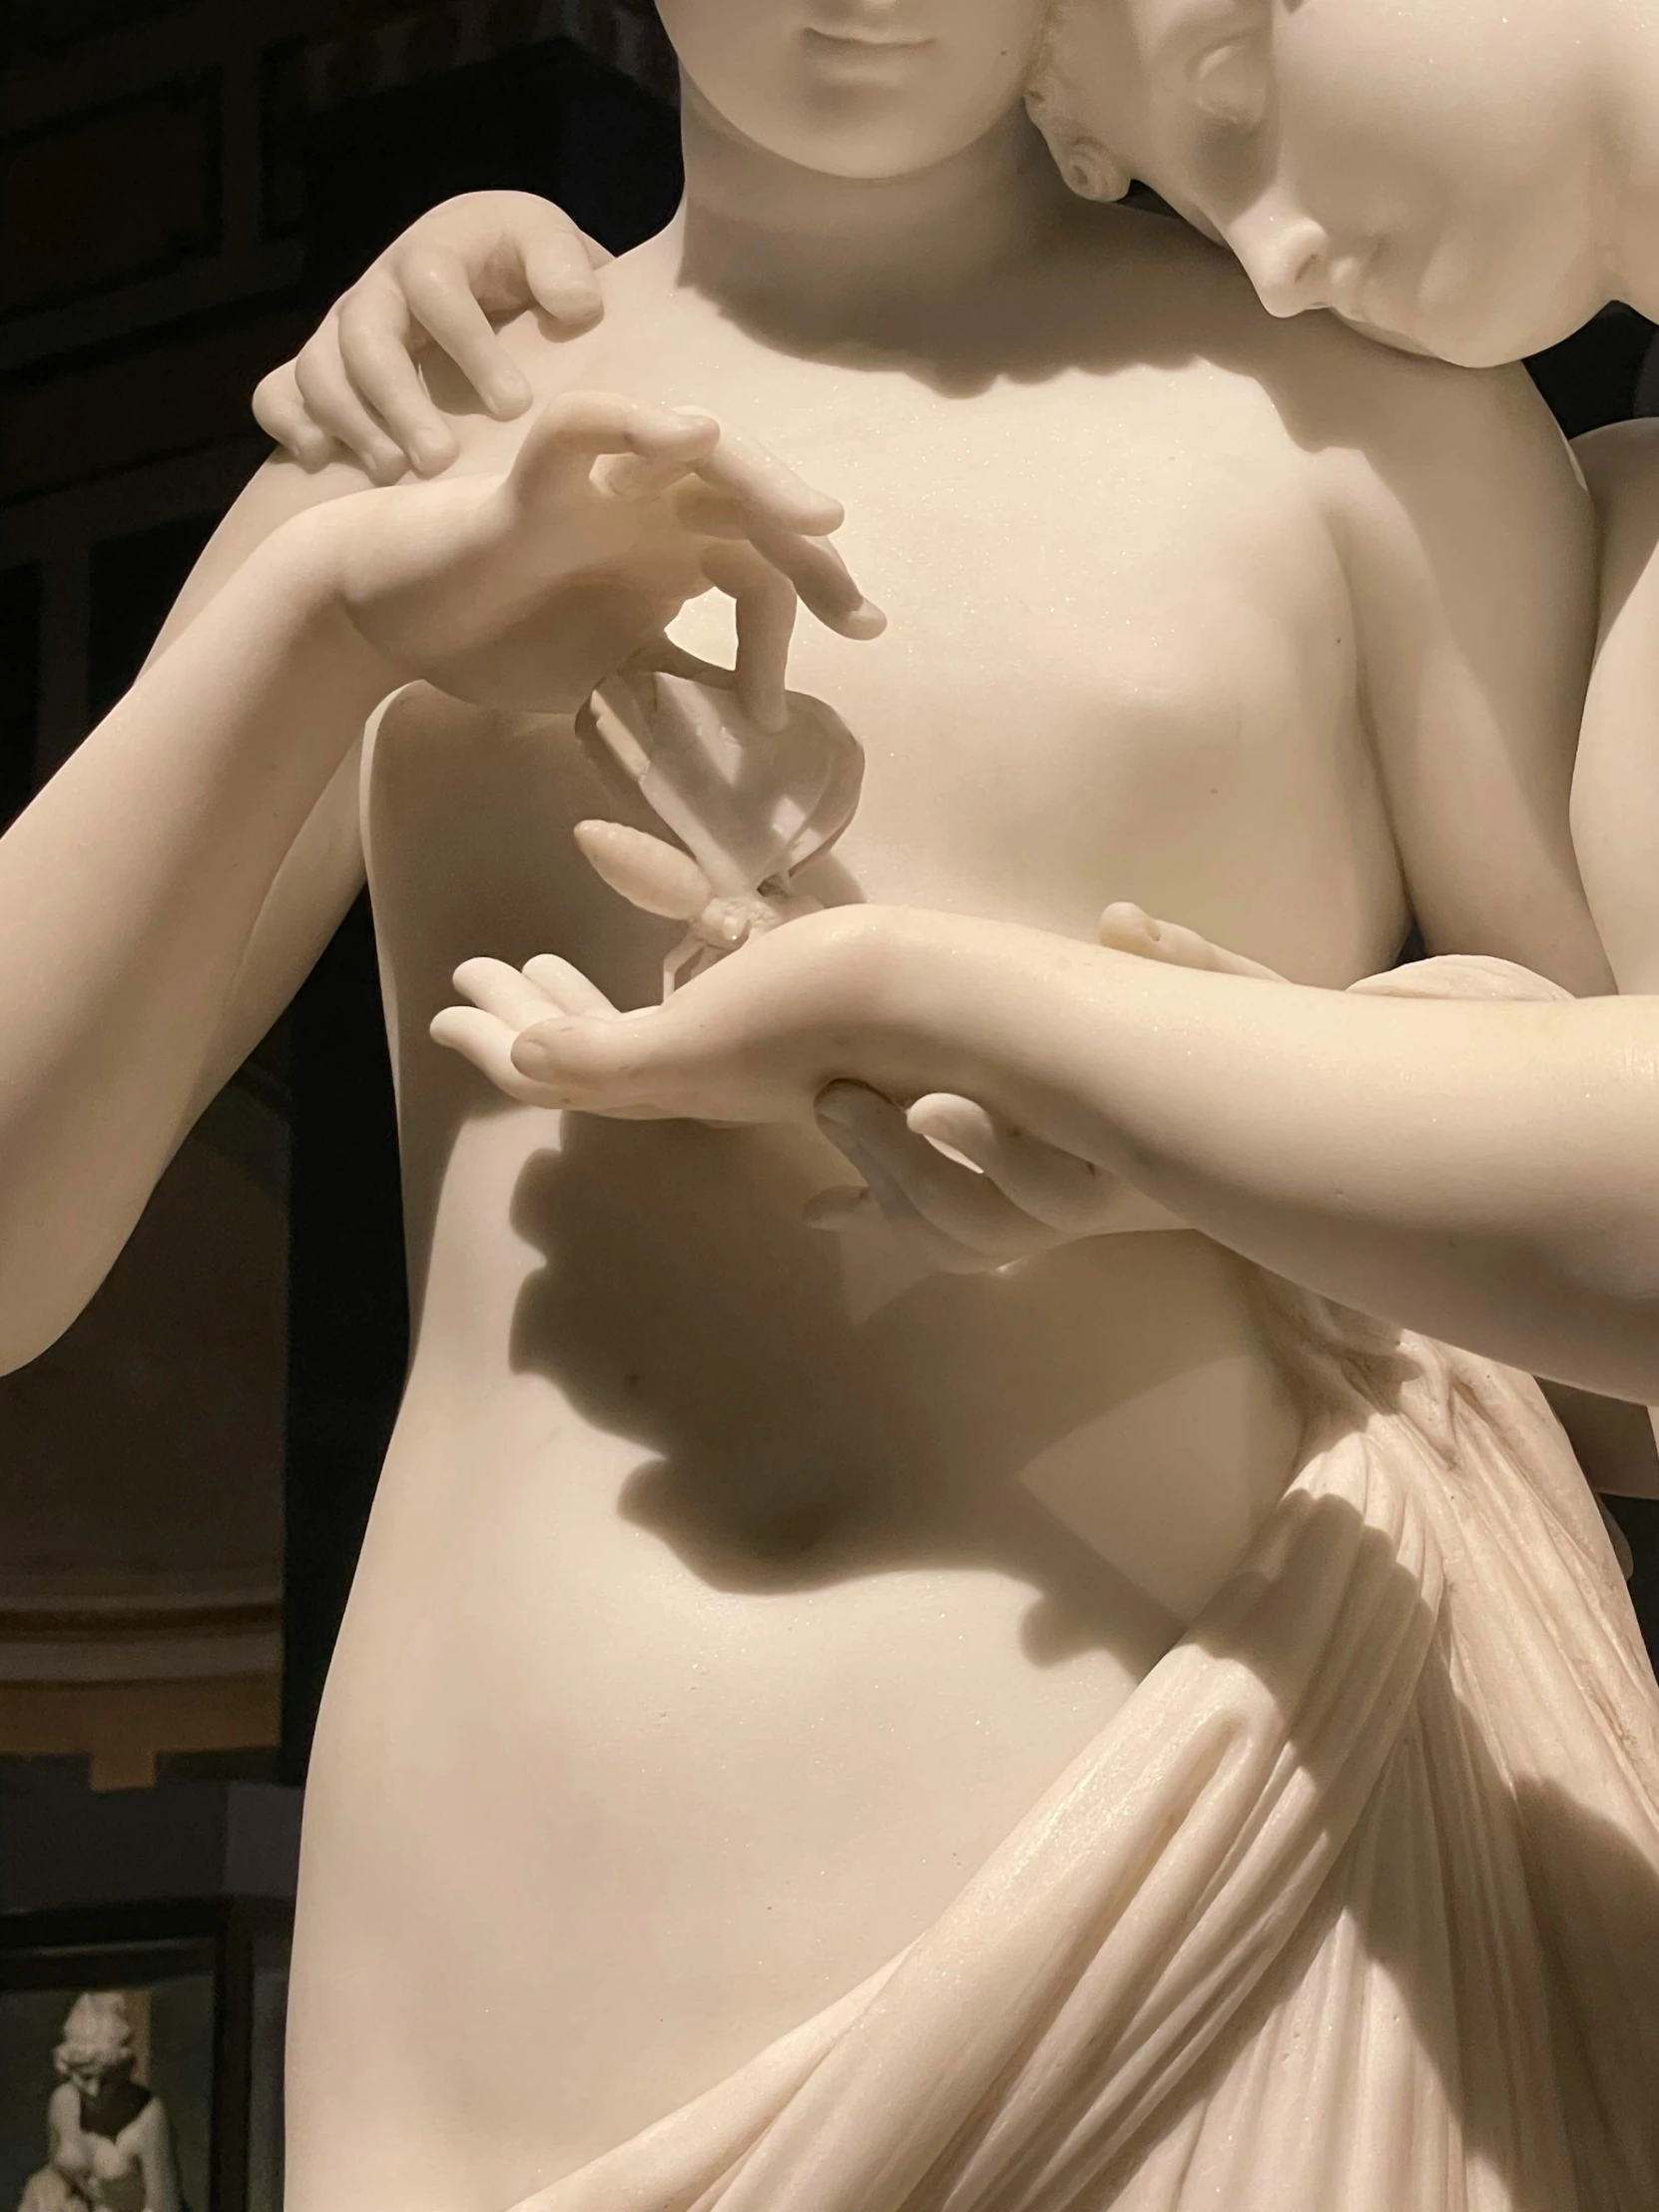 a couple of statues standing next to each other, by Gian Lorenzo Bernini, skin detail, pale milky white porcelain skin, partially cupping her hands, phone photo